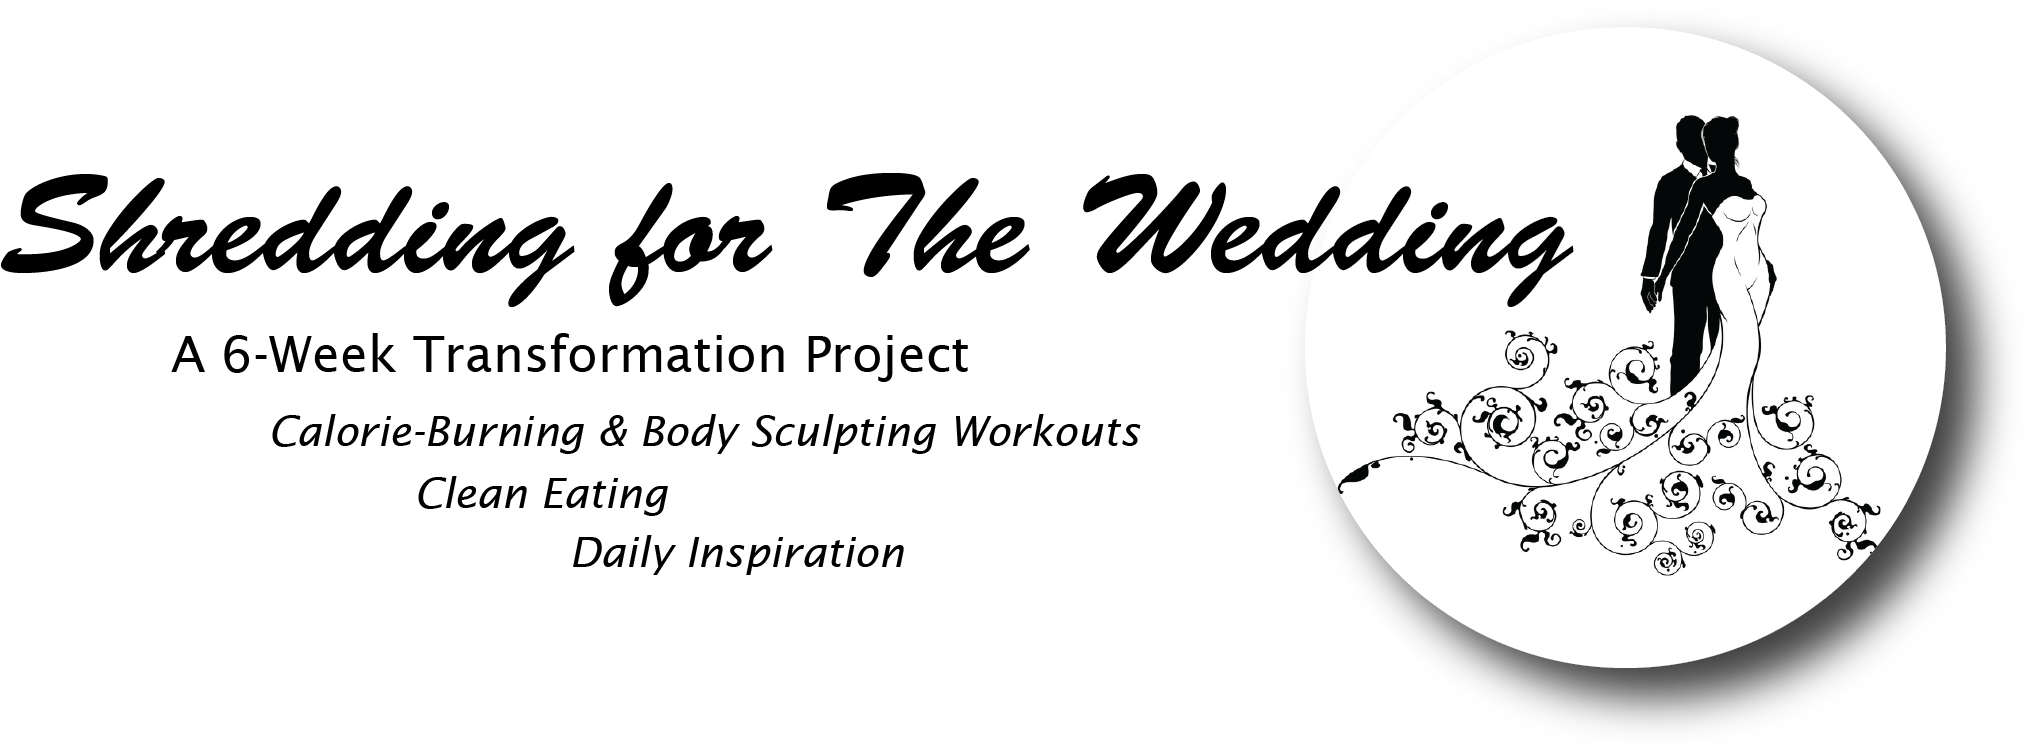 A White Moon With Black Text